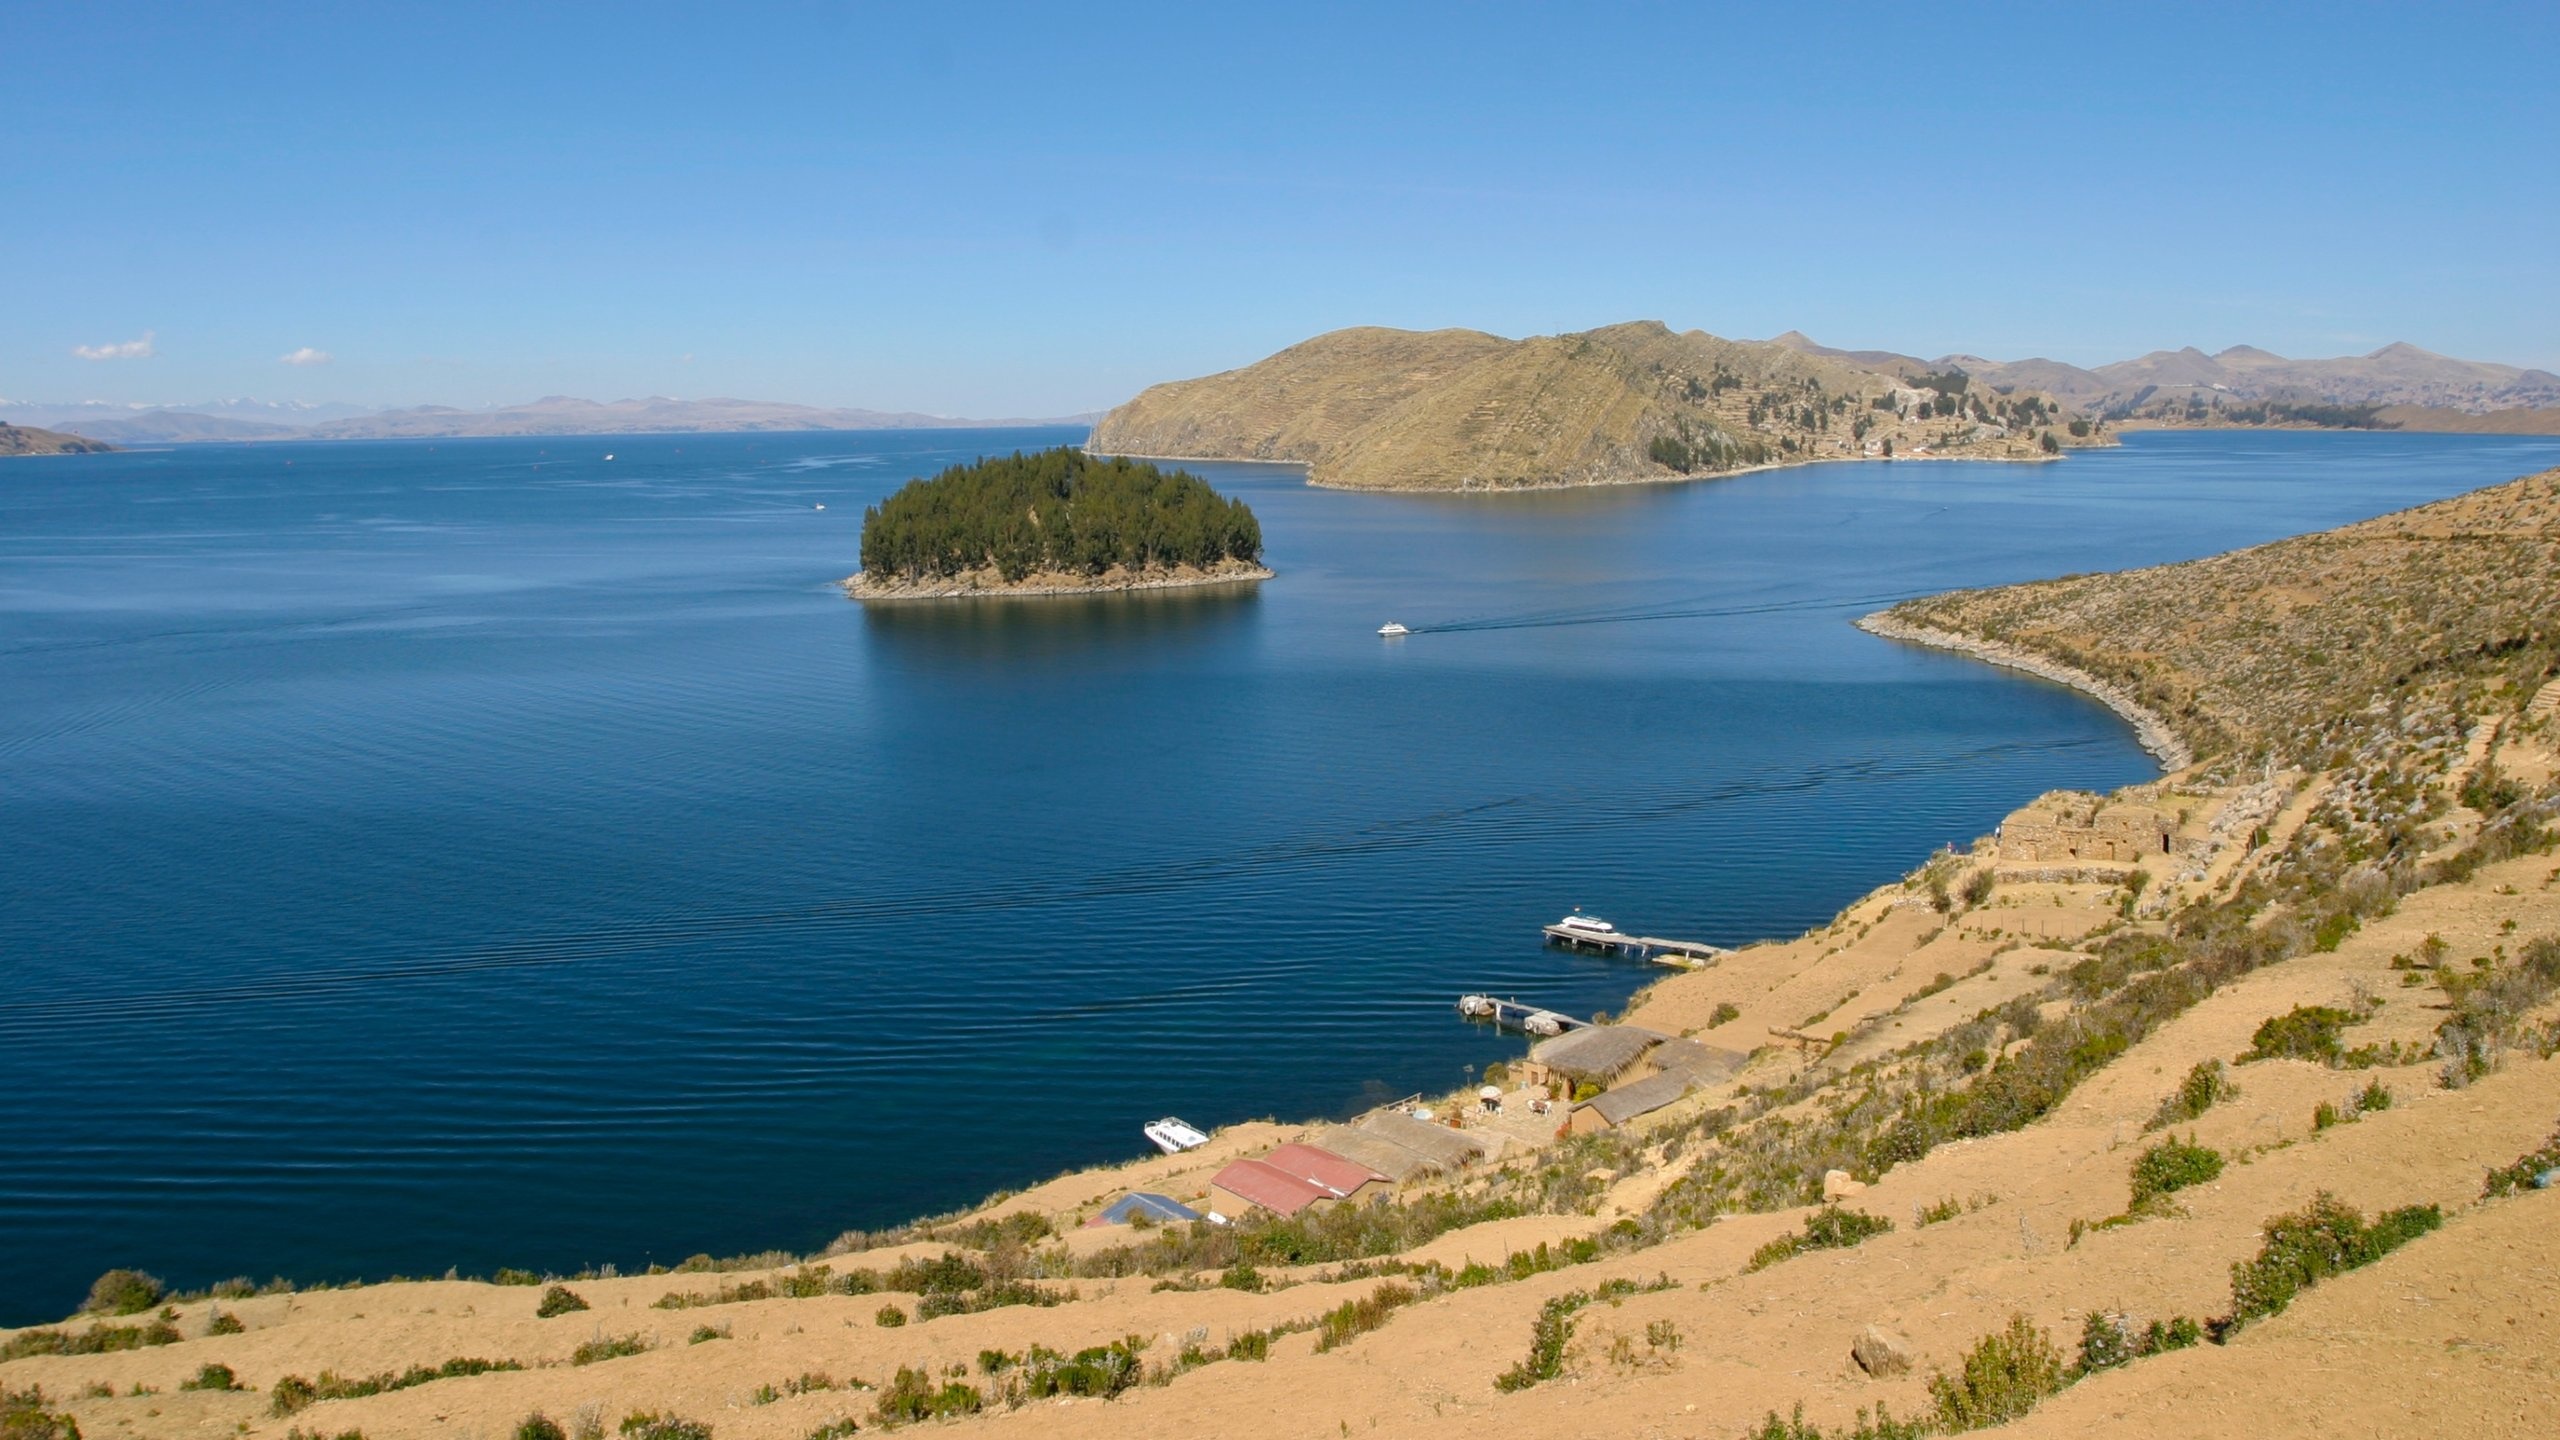 Lake Titicaca wallpapers, Ethan Sellers, Inspiring landscapes, Ethereal beauty, 2560x1440 HD Desktop